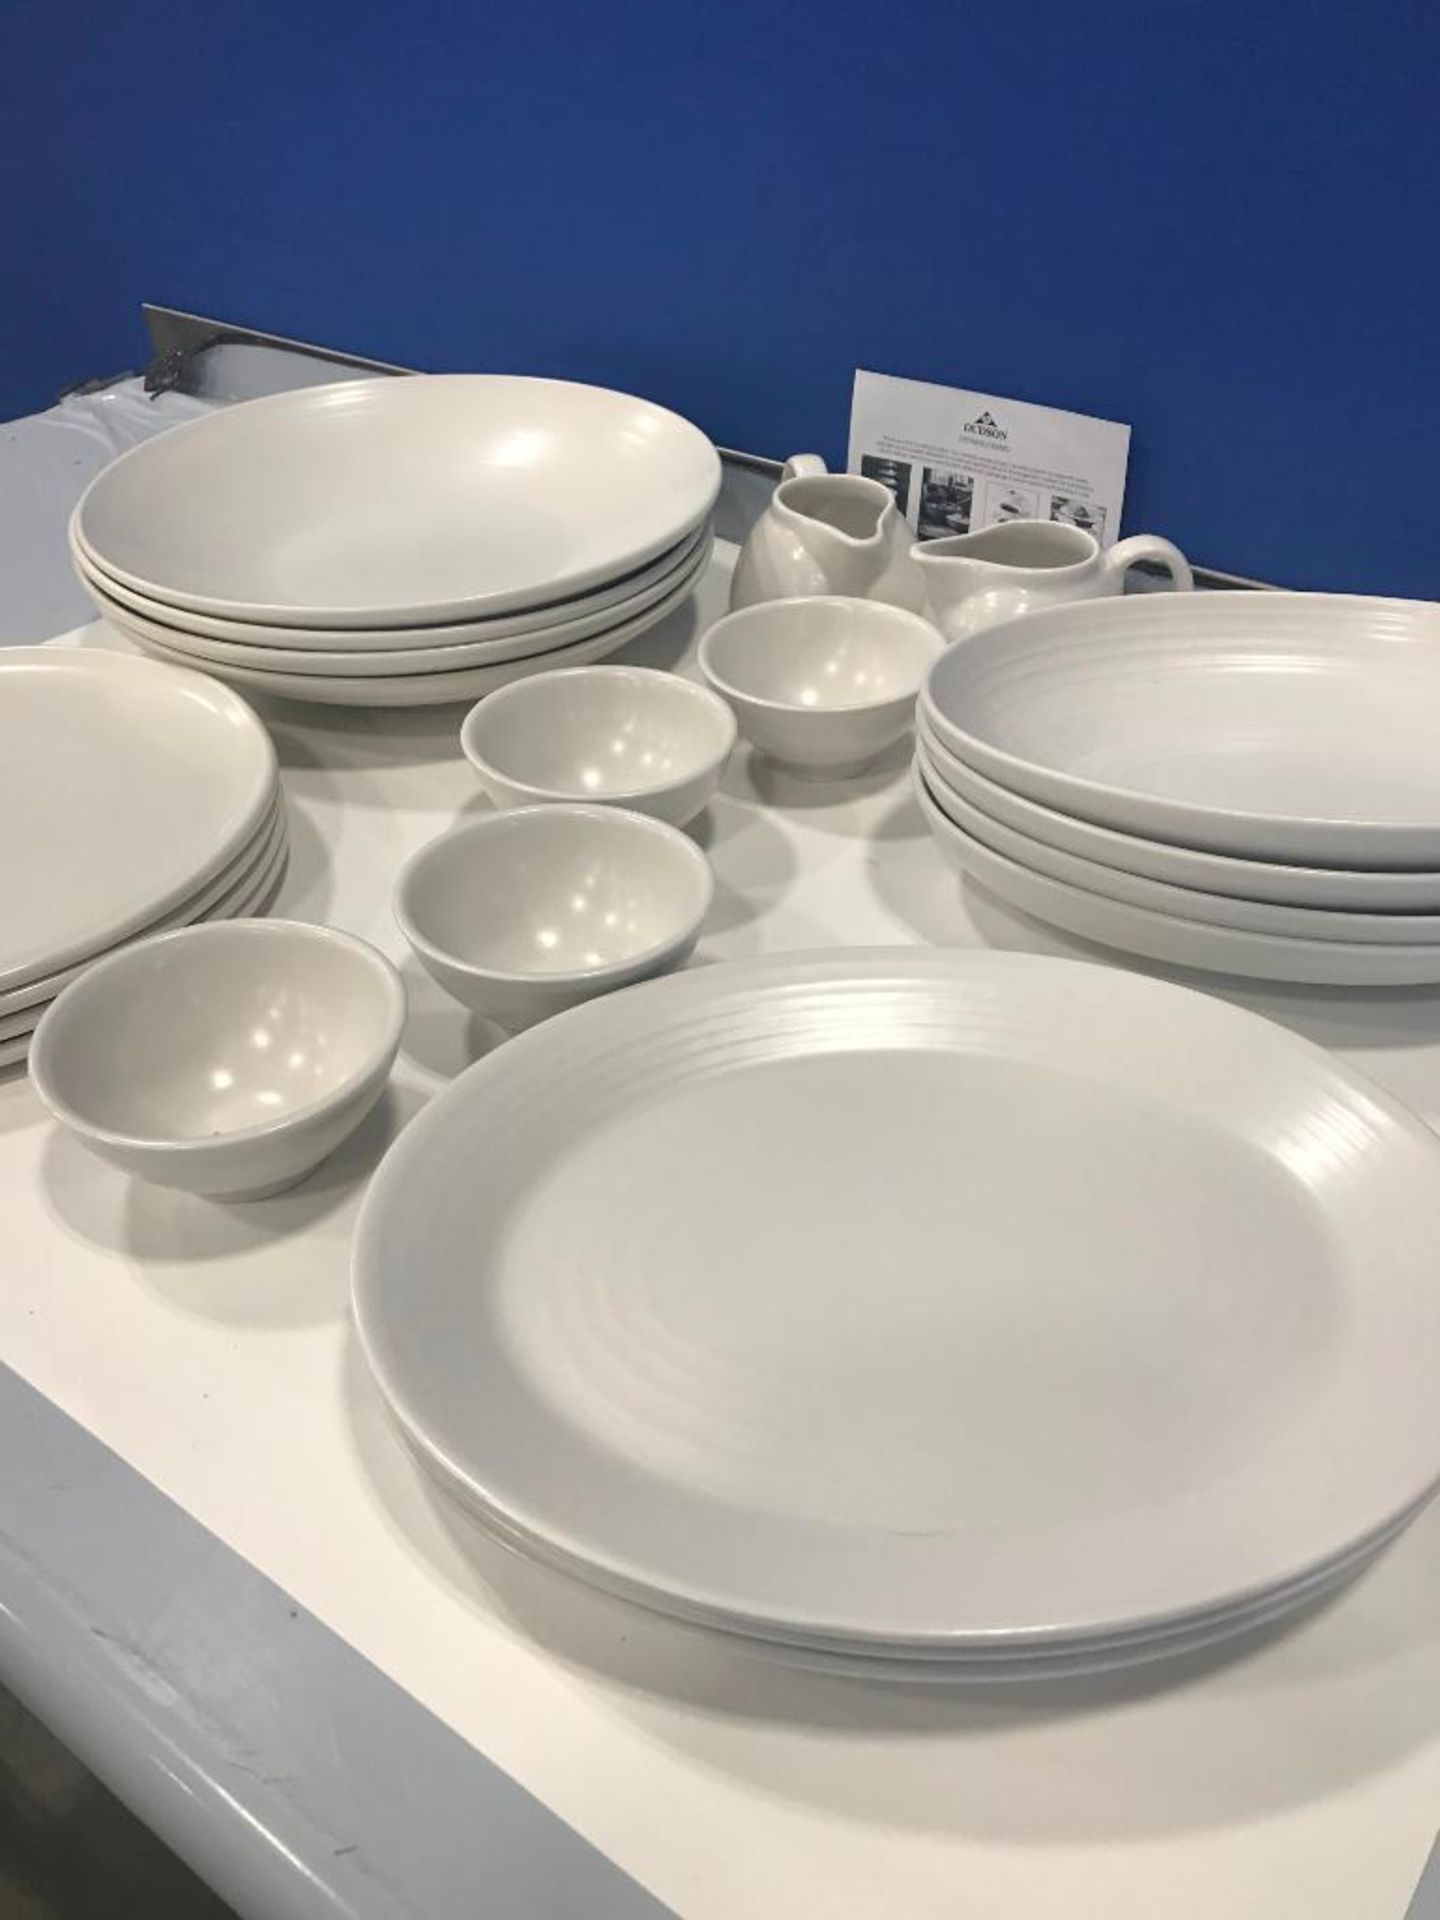 22 PIECE DUDSON EVO PEARL DINNERWARE SET, MADE IN ENGLAND - Image 8 of 8